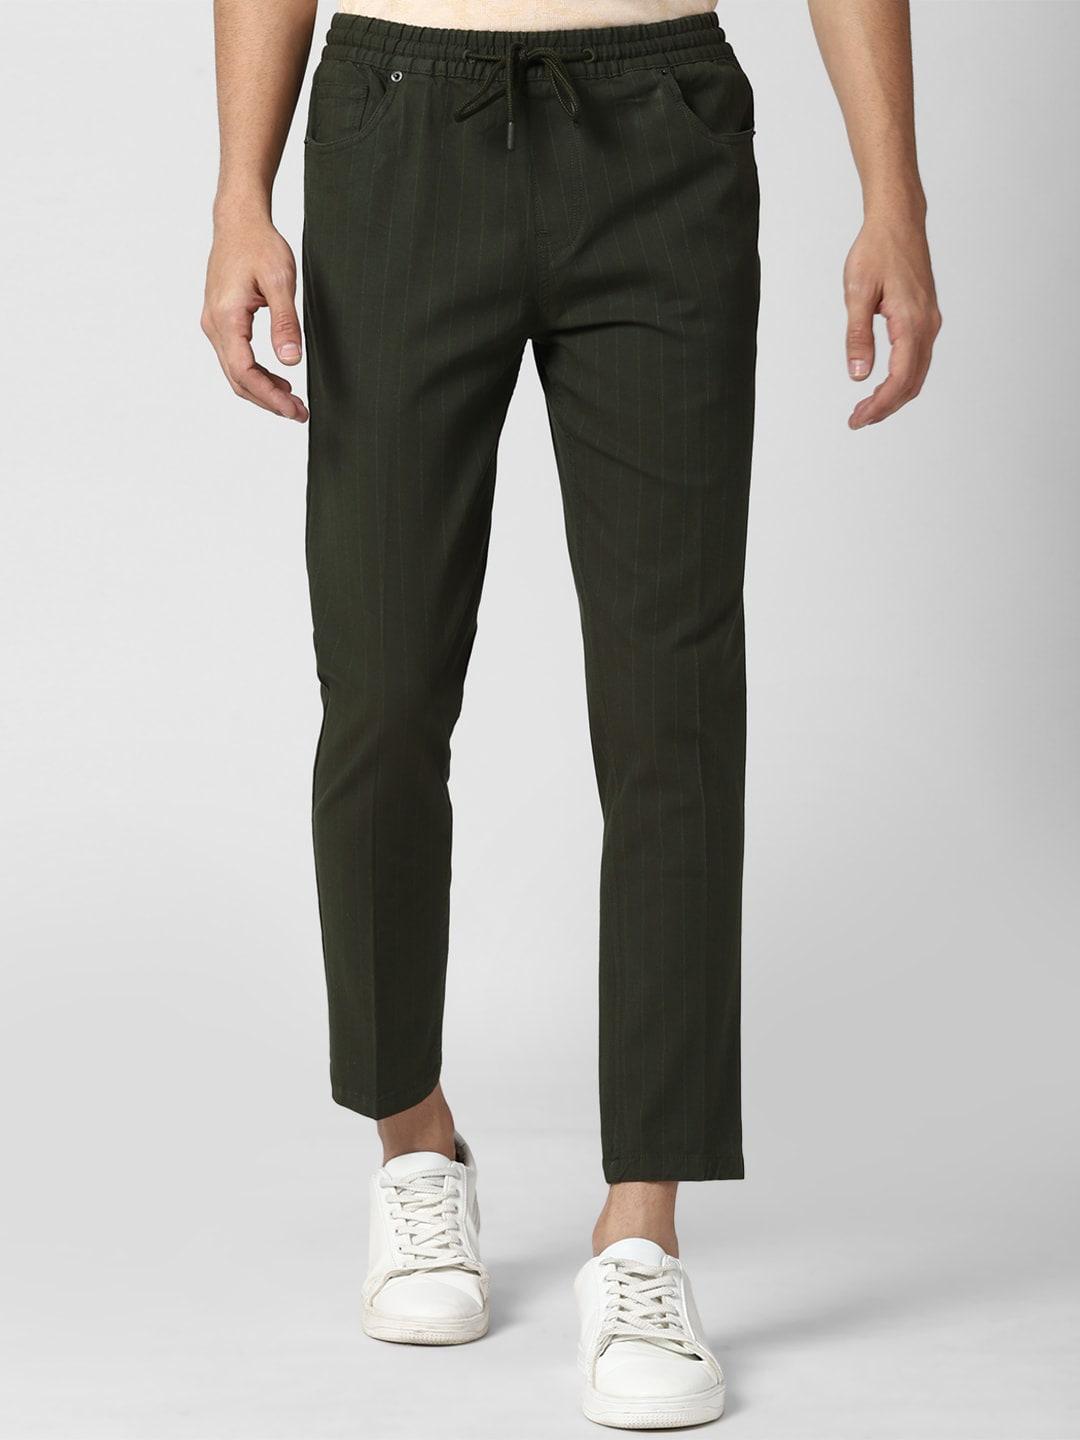 peter-england-casuals-men-olive-green-striped-slim-fit-trousers